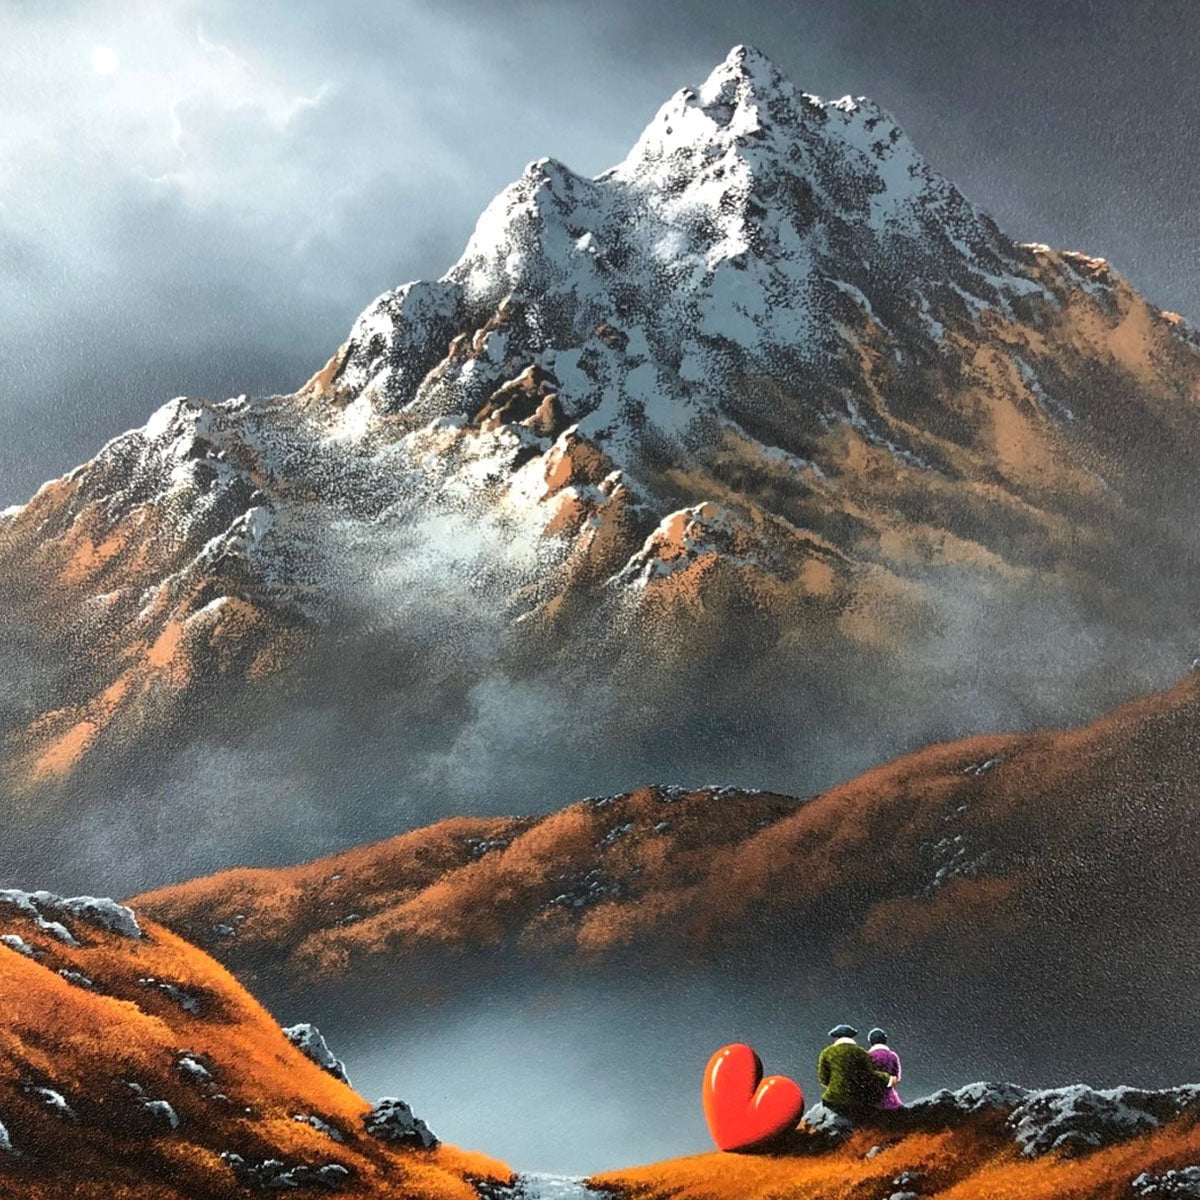 Nothing is Impossible With You - Original David Renshaw Original